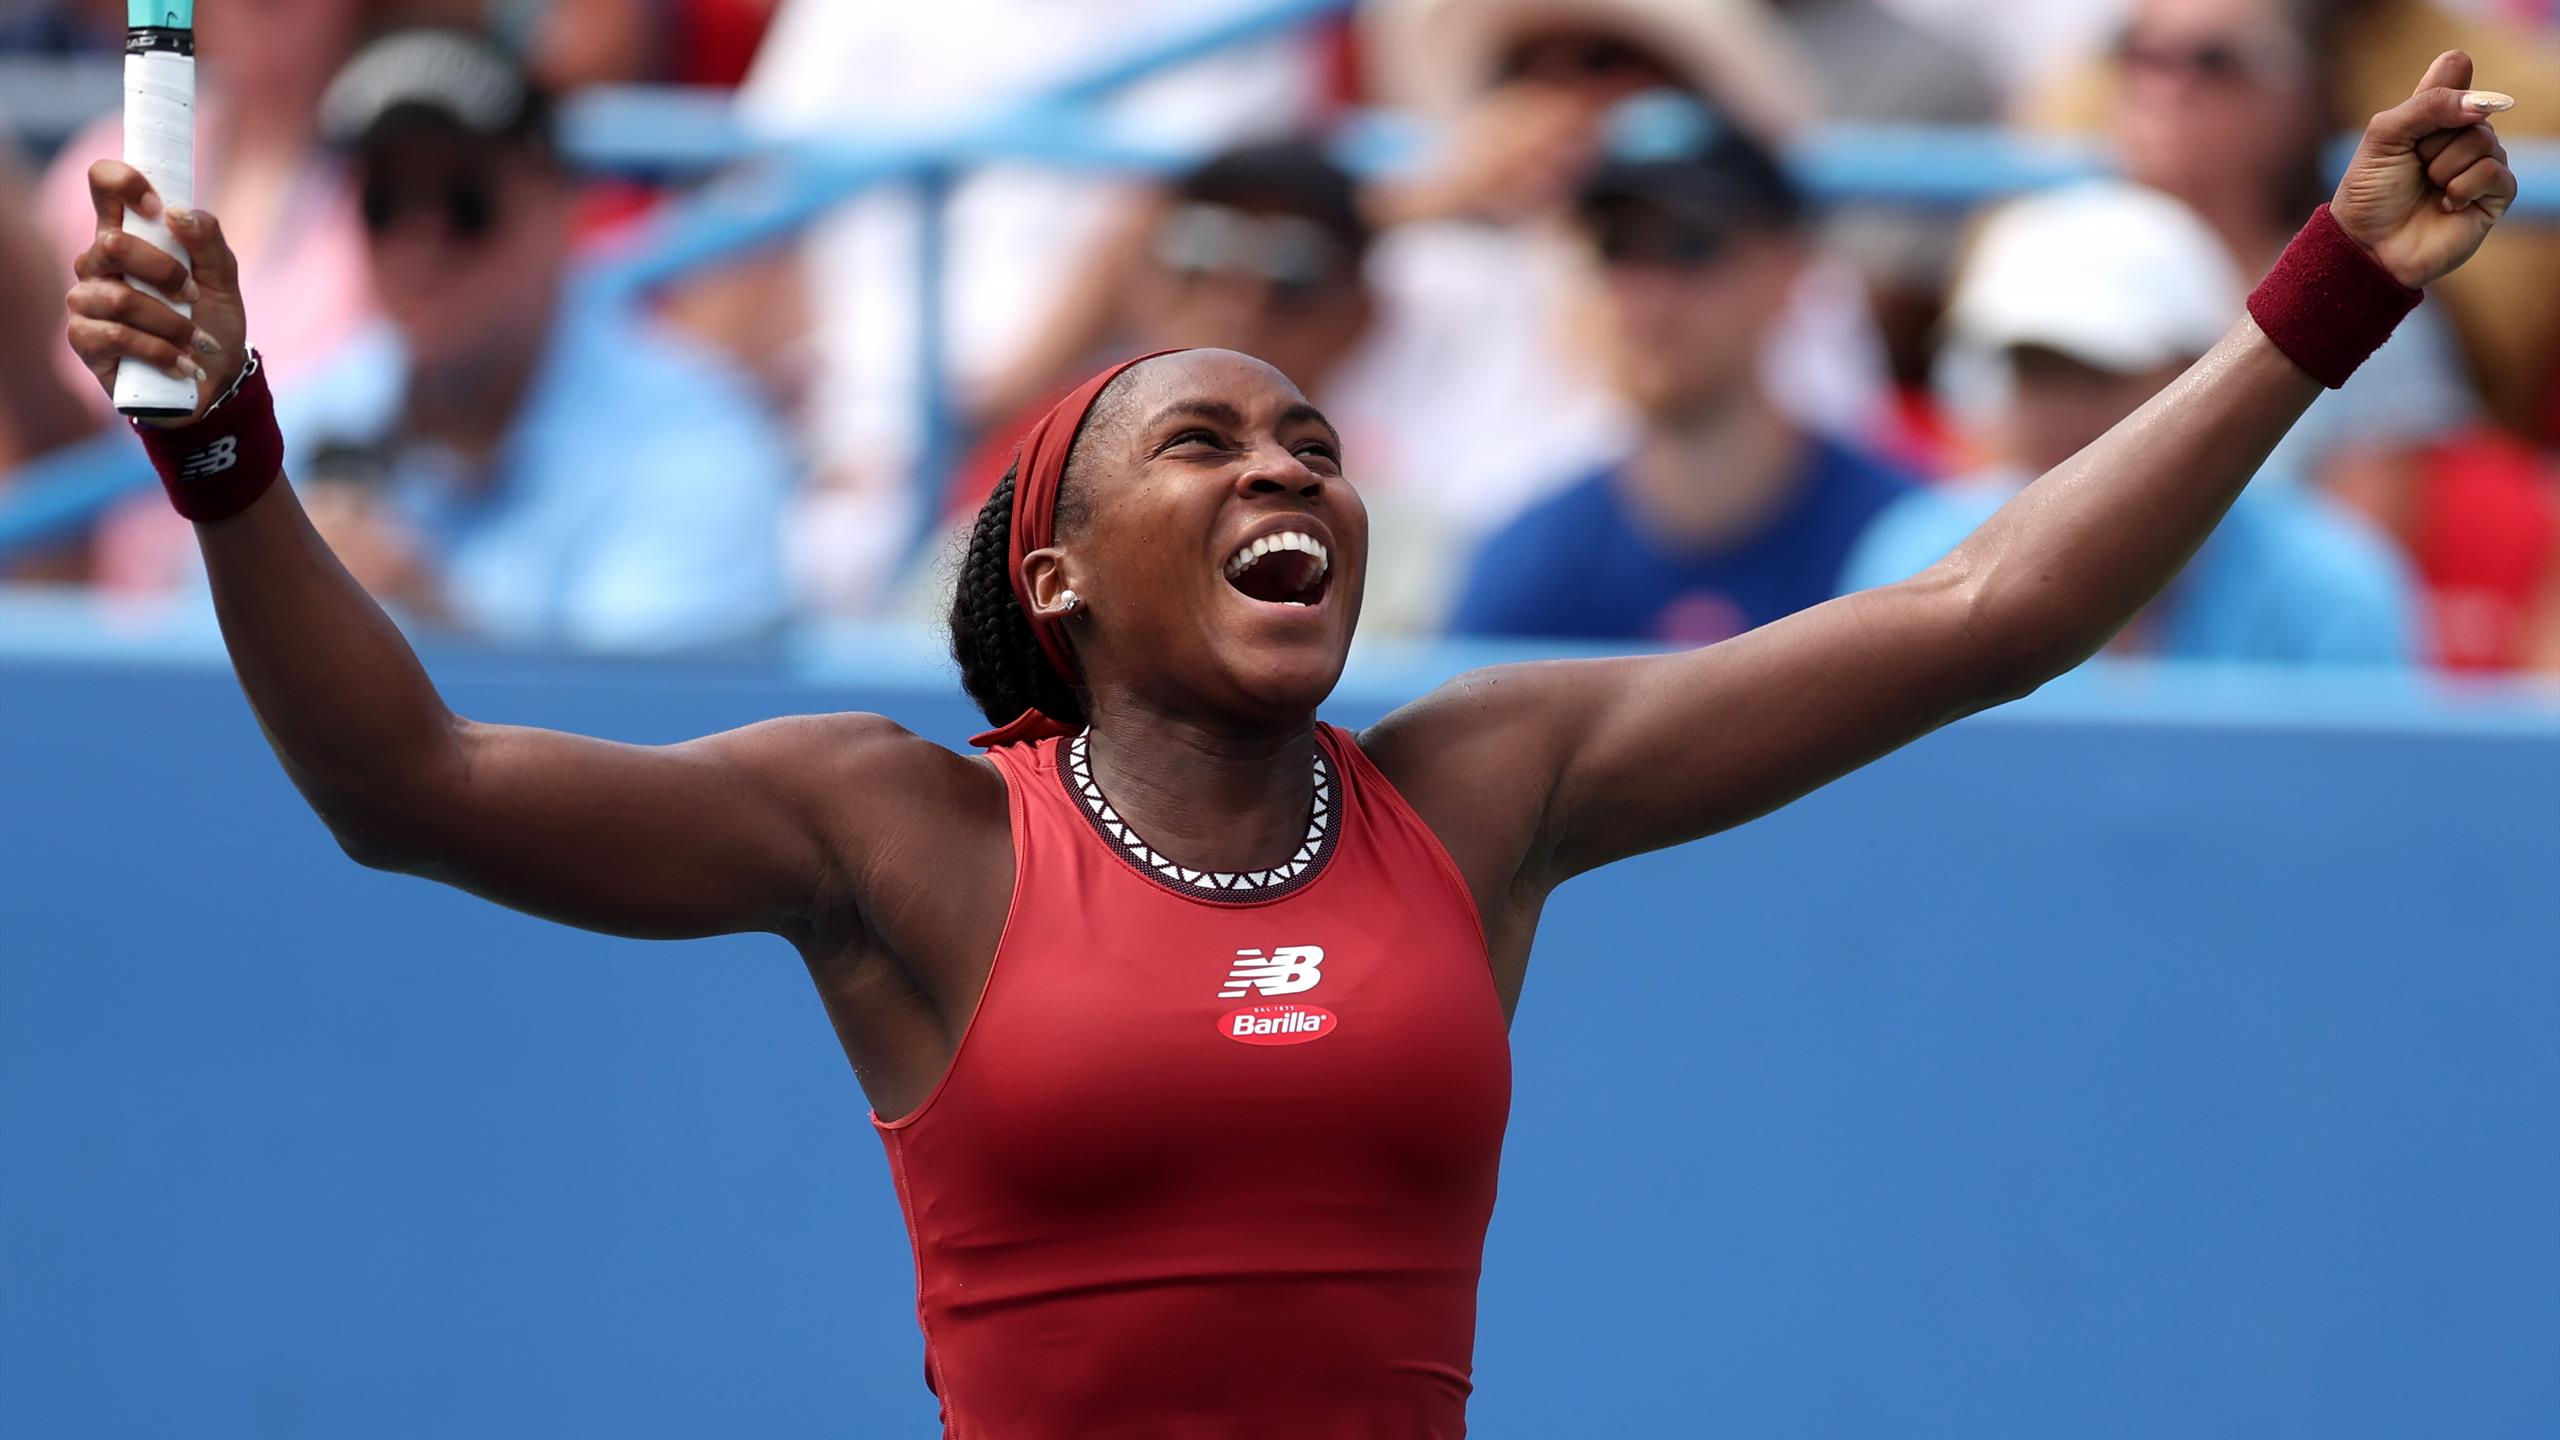 After making $3 million from her US Open win, Coco Gauff stands the risk of losing the real riches that are to follow. She was acused of using a ....Full story inside